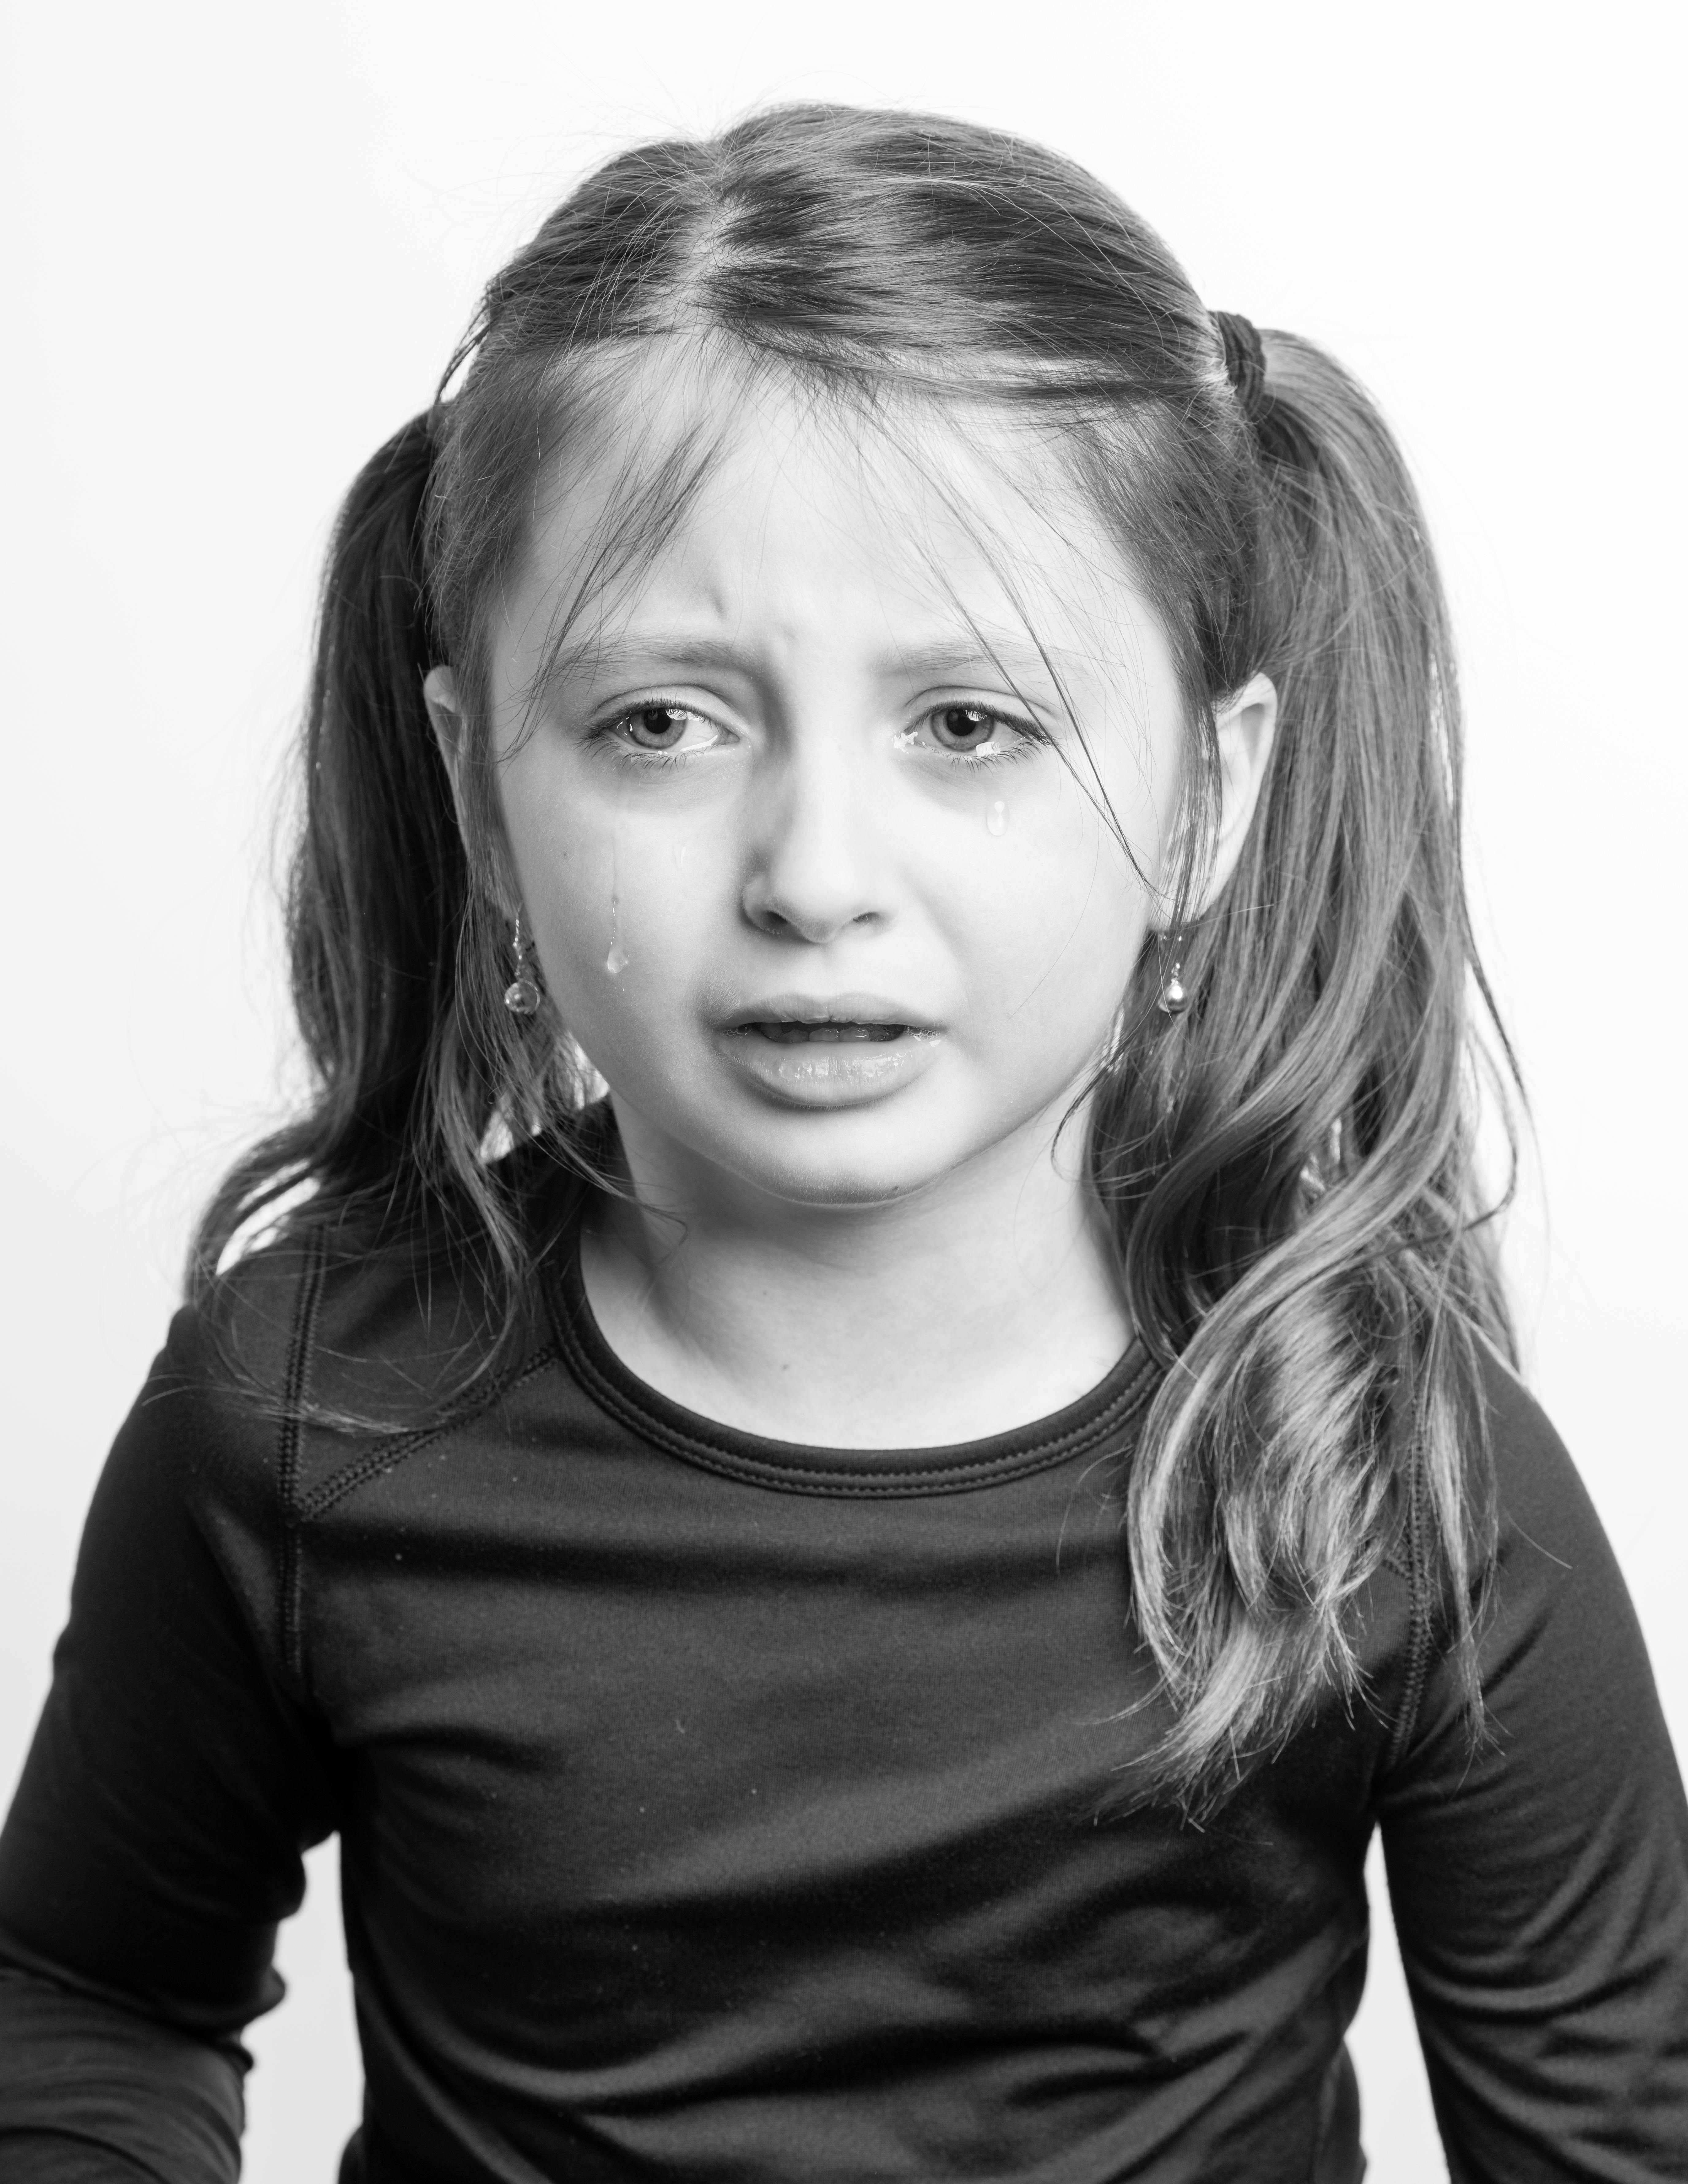 A little girl crying and looking upset | Source: Pexels